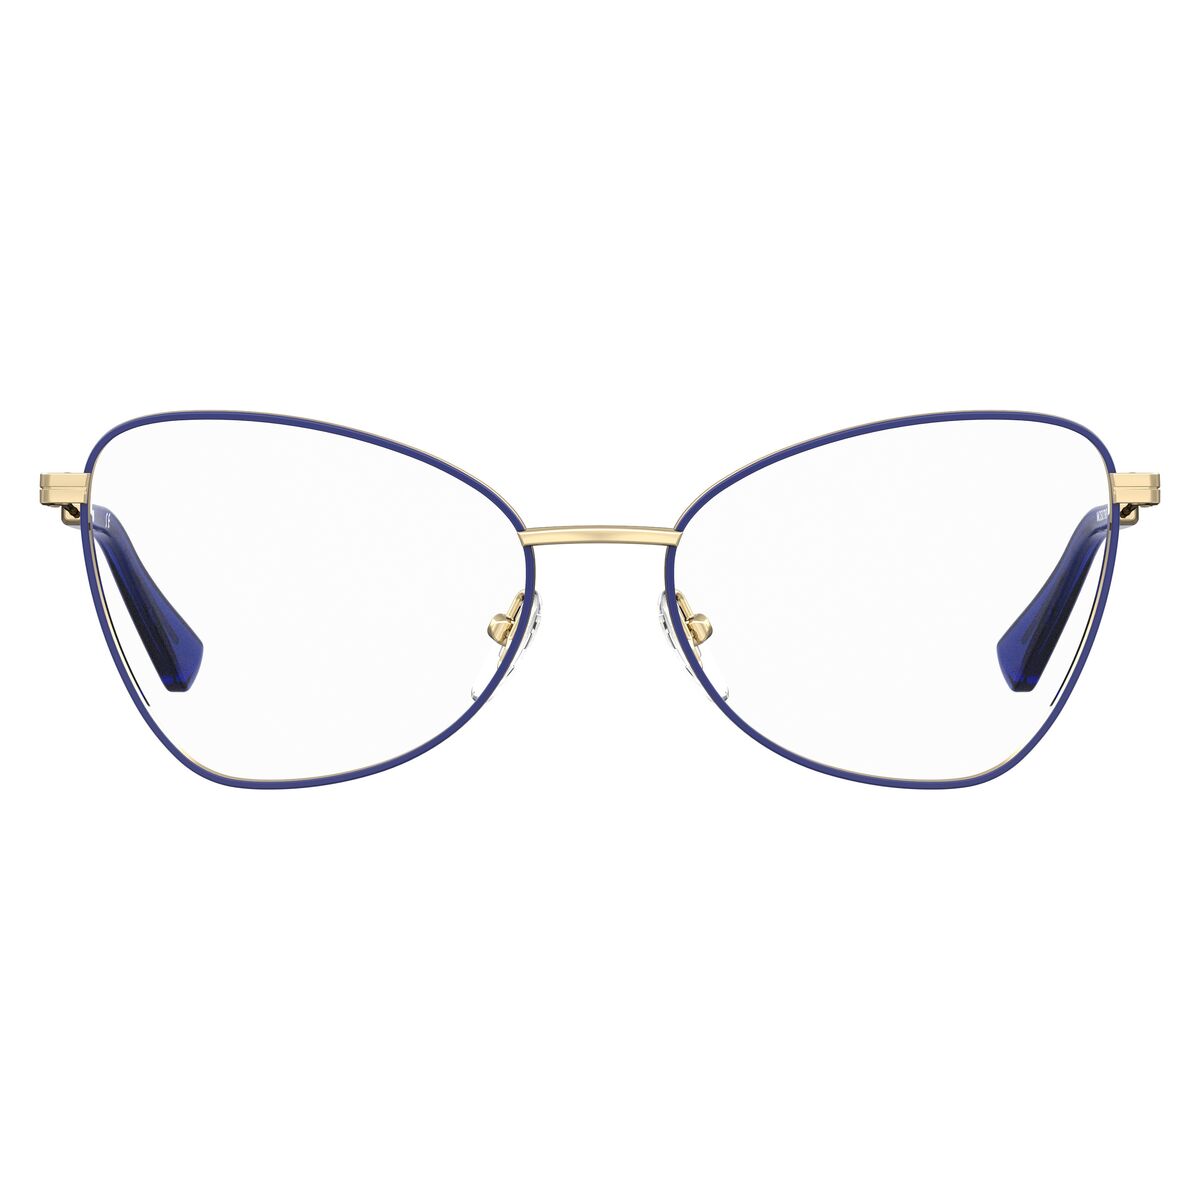 Ladies' Spectacle frame Moschino MOS574-PJP Ø 52 mm